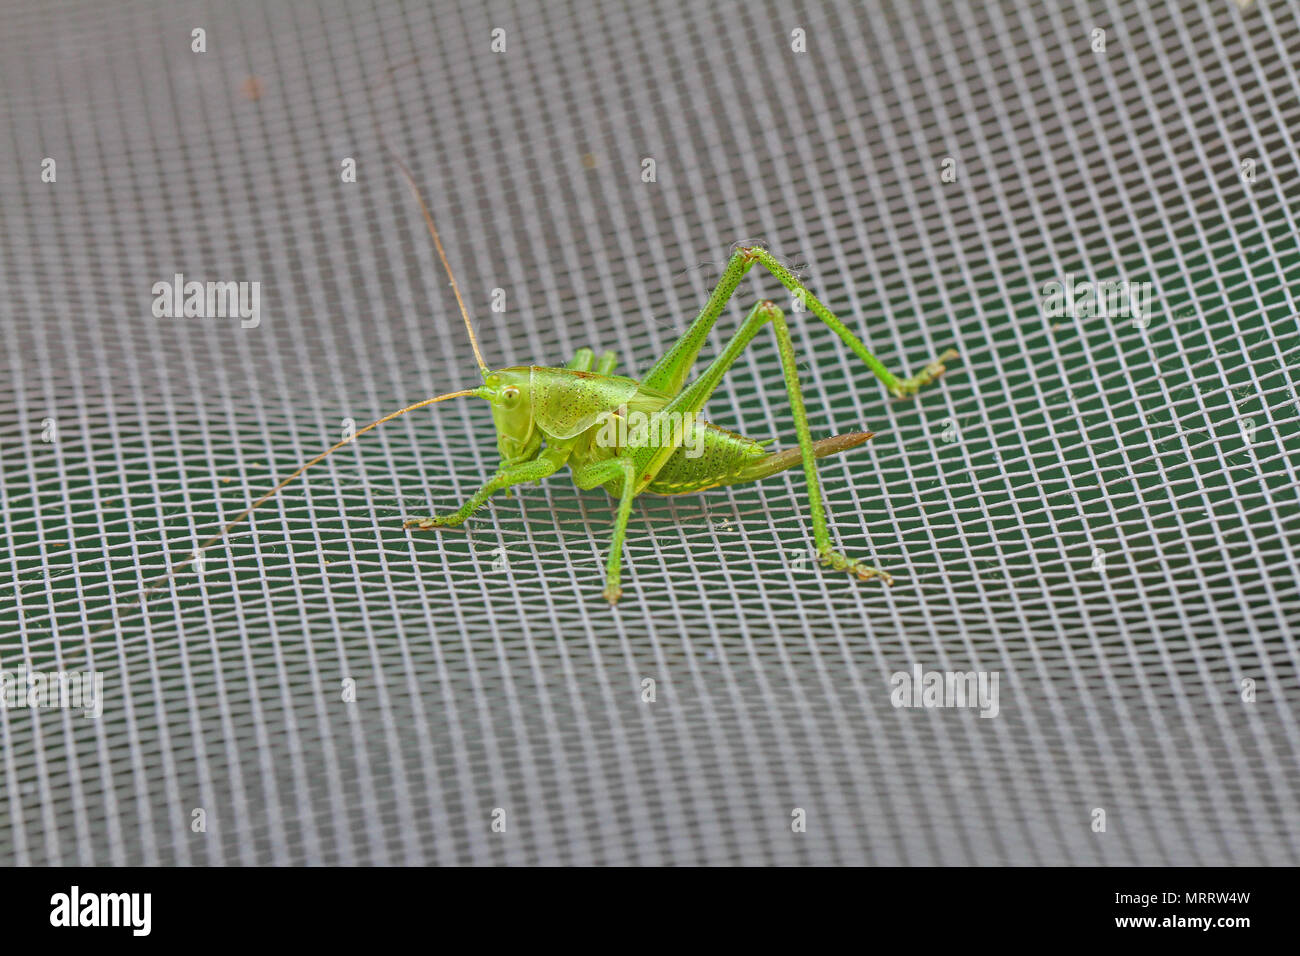 green speckled bush cricket or katydid close up Latin name leptophyes punctatissima or grasshopper on screen door in central Italy in summer Stock Photo